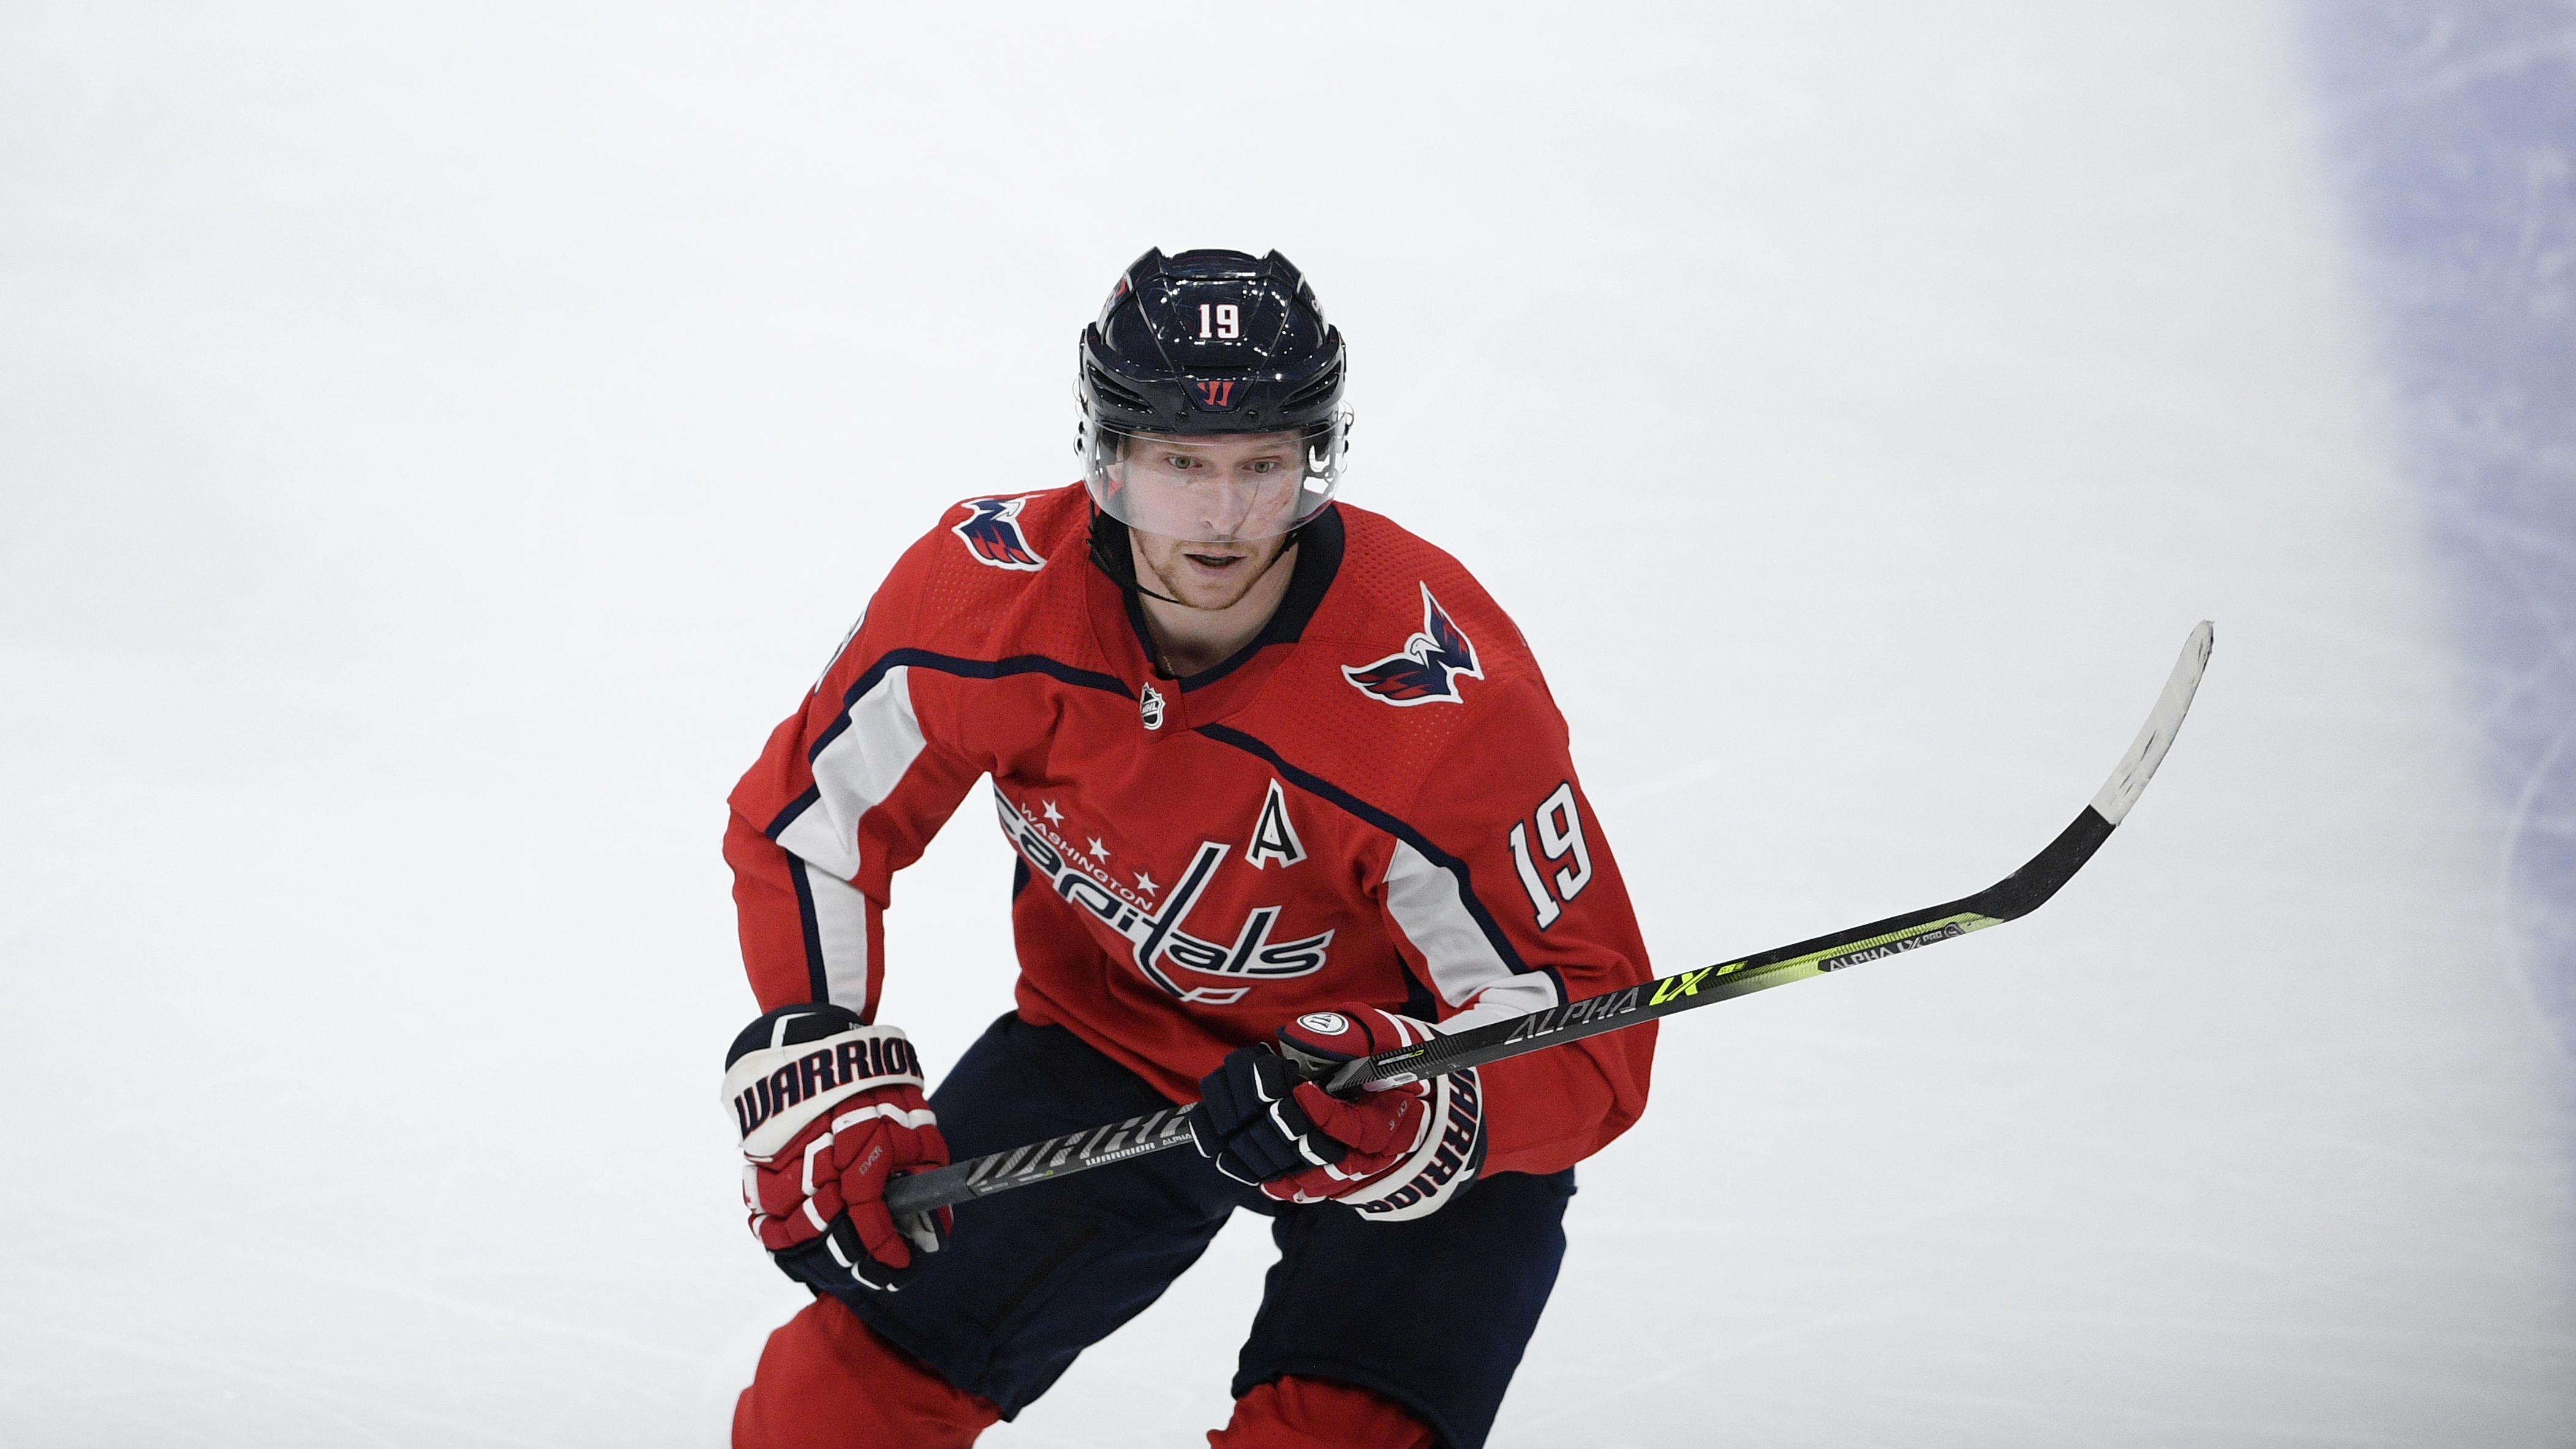 Alarm clock fail caused Alex Ovechkin to miss Tuesday's game